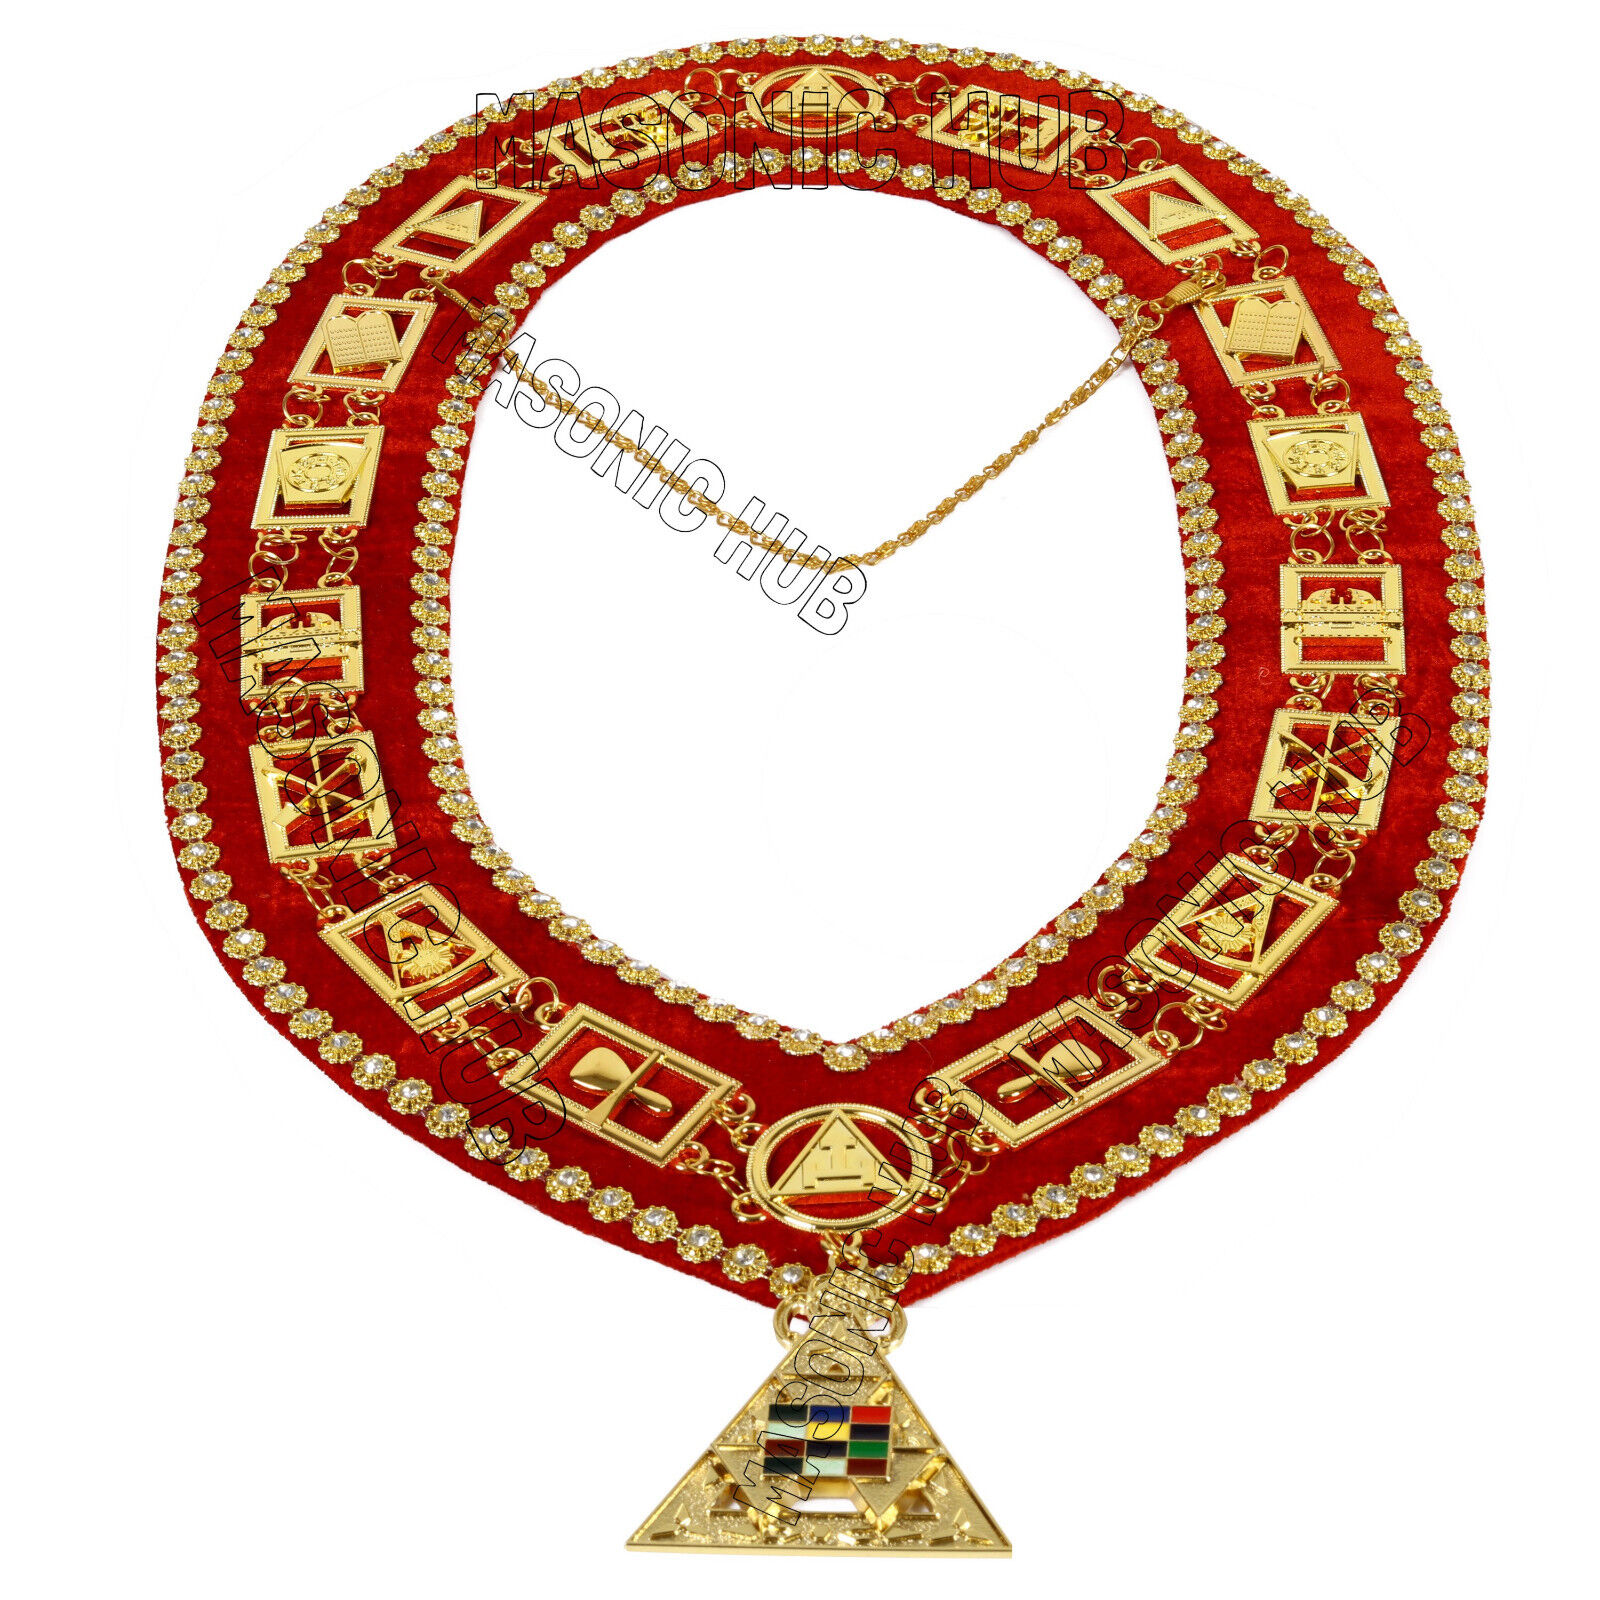 Masonic Royal Arch PHP Past High Priest Metal Chain Collar With Free Jewel